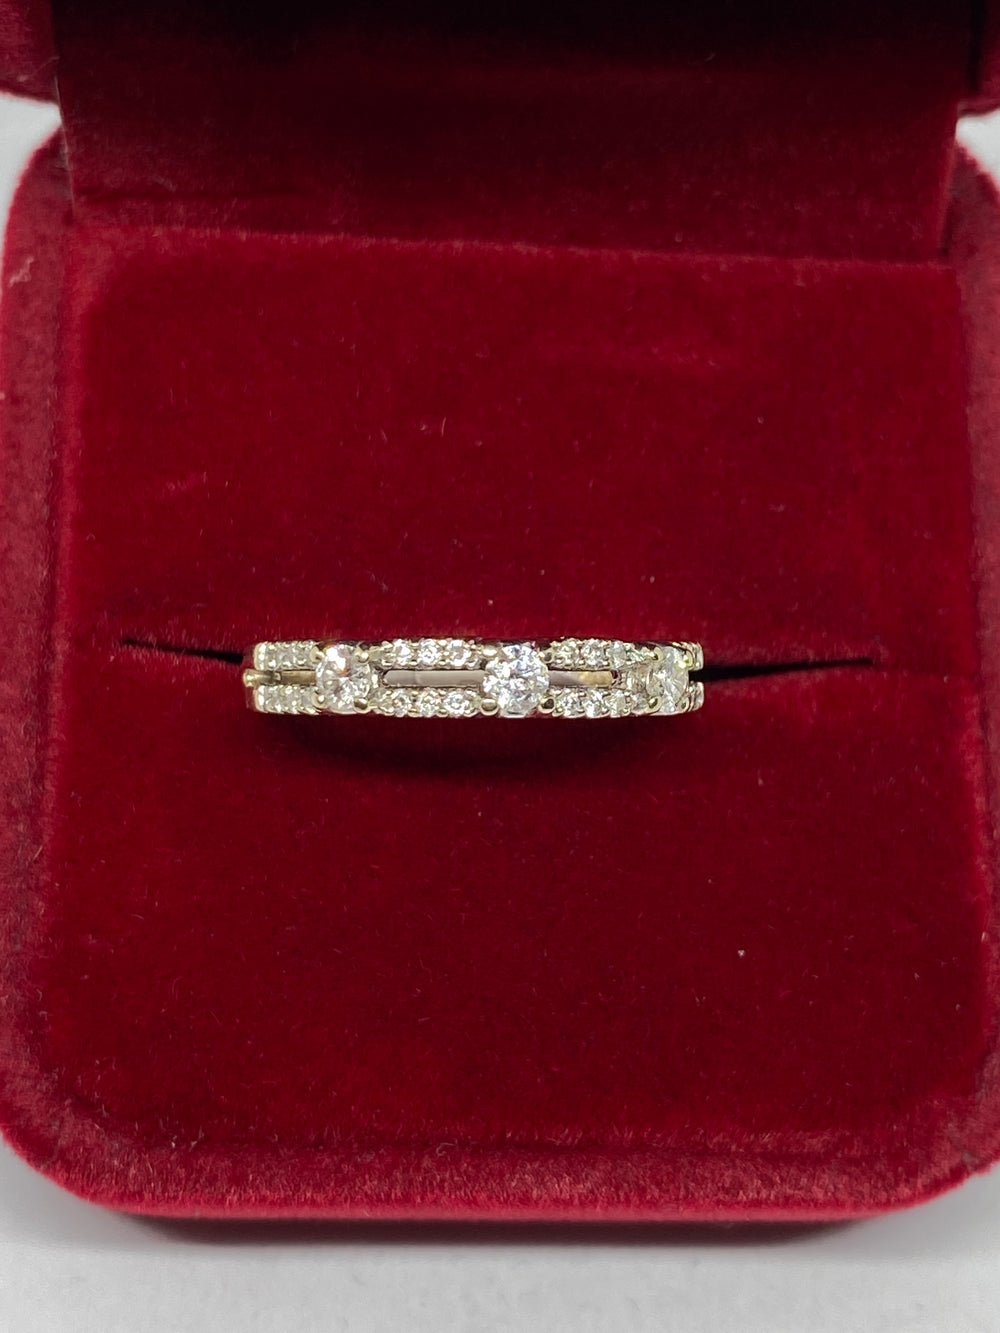 Real 10KT White Gold & 1.0CTW Diamond Lady Ring